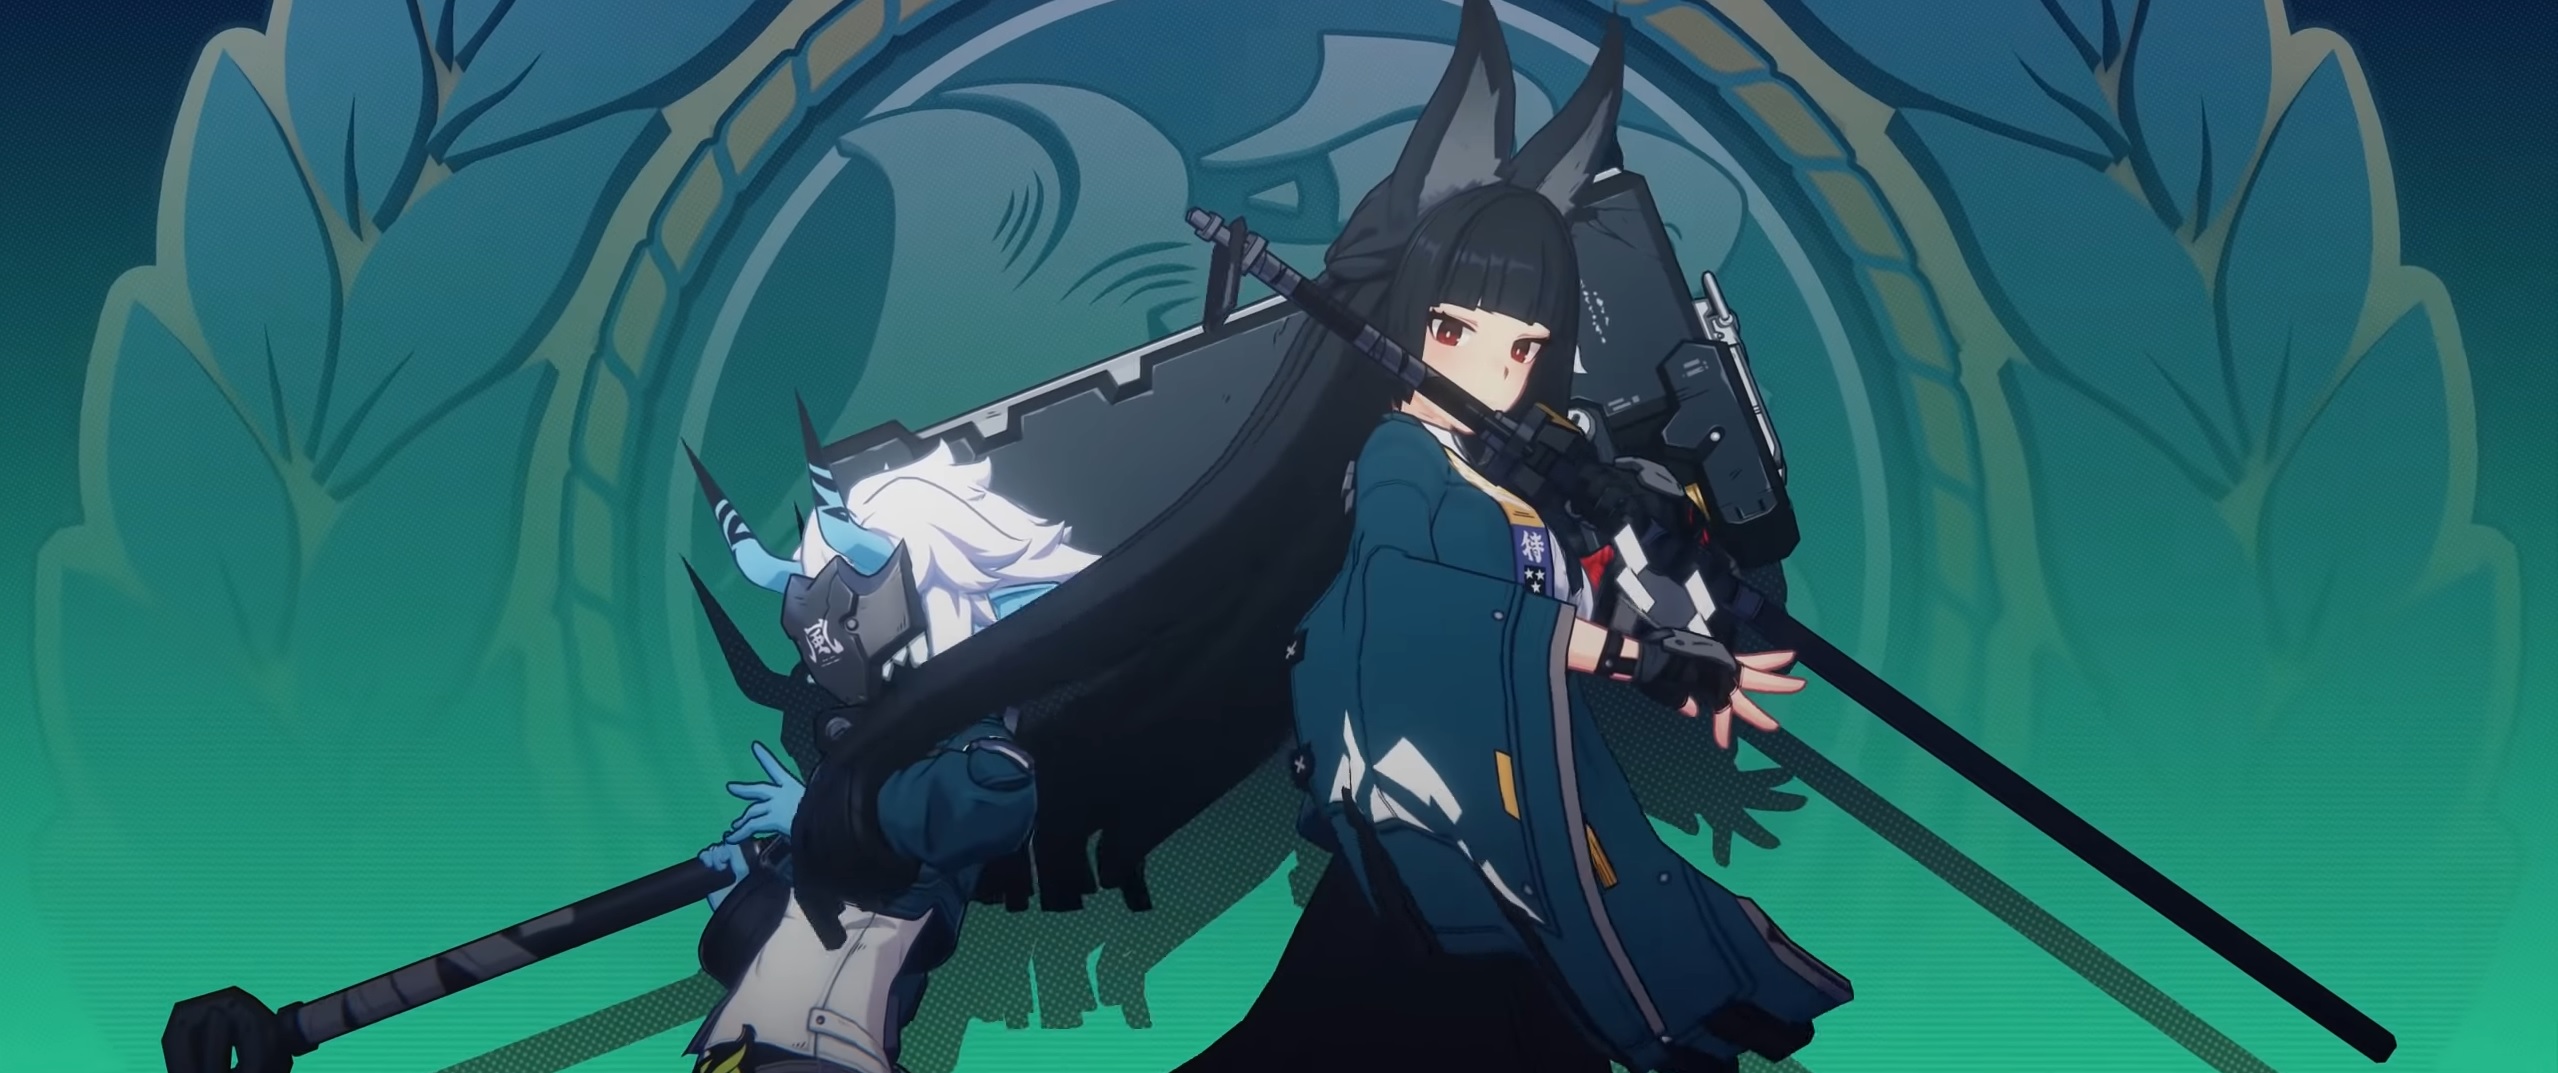 Zenless Zone Zero - A girl with red eyes, cat ears, and a katana sword stands next to a masked blue demon with horns and a large flat axe.